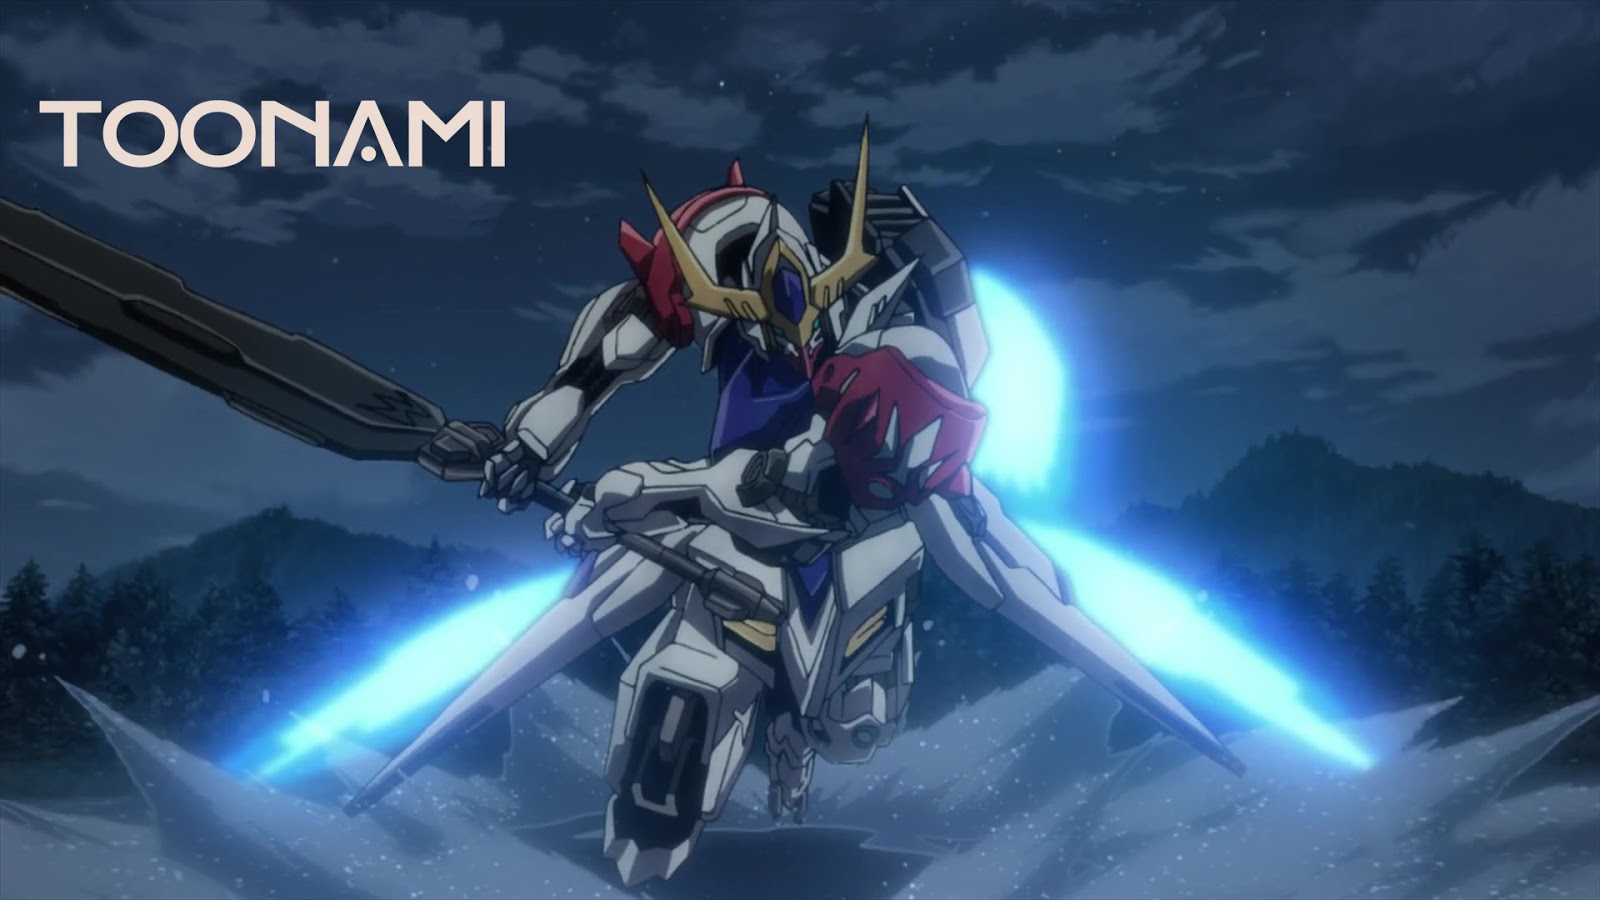 Toonami to Air Mobile Suit Gundam Iron-Blooded Orphans Season 2 in October